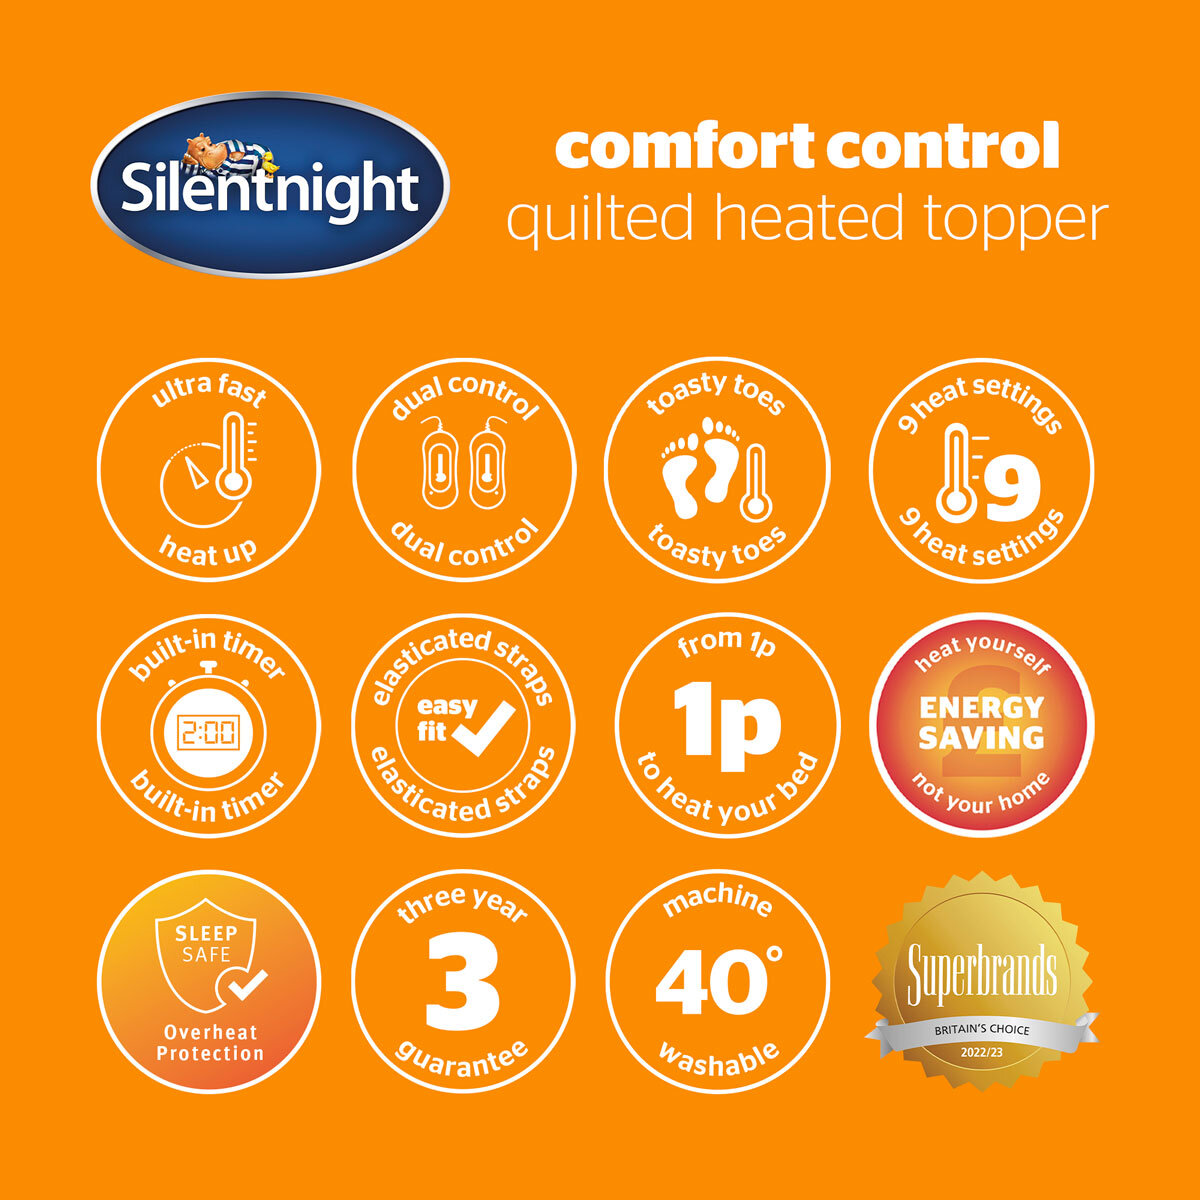 Image of all benefits and guarentees the silent night heated topper comes with.